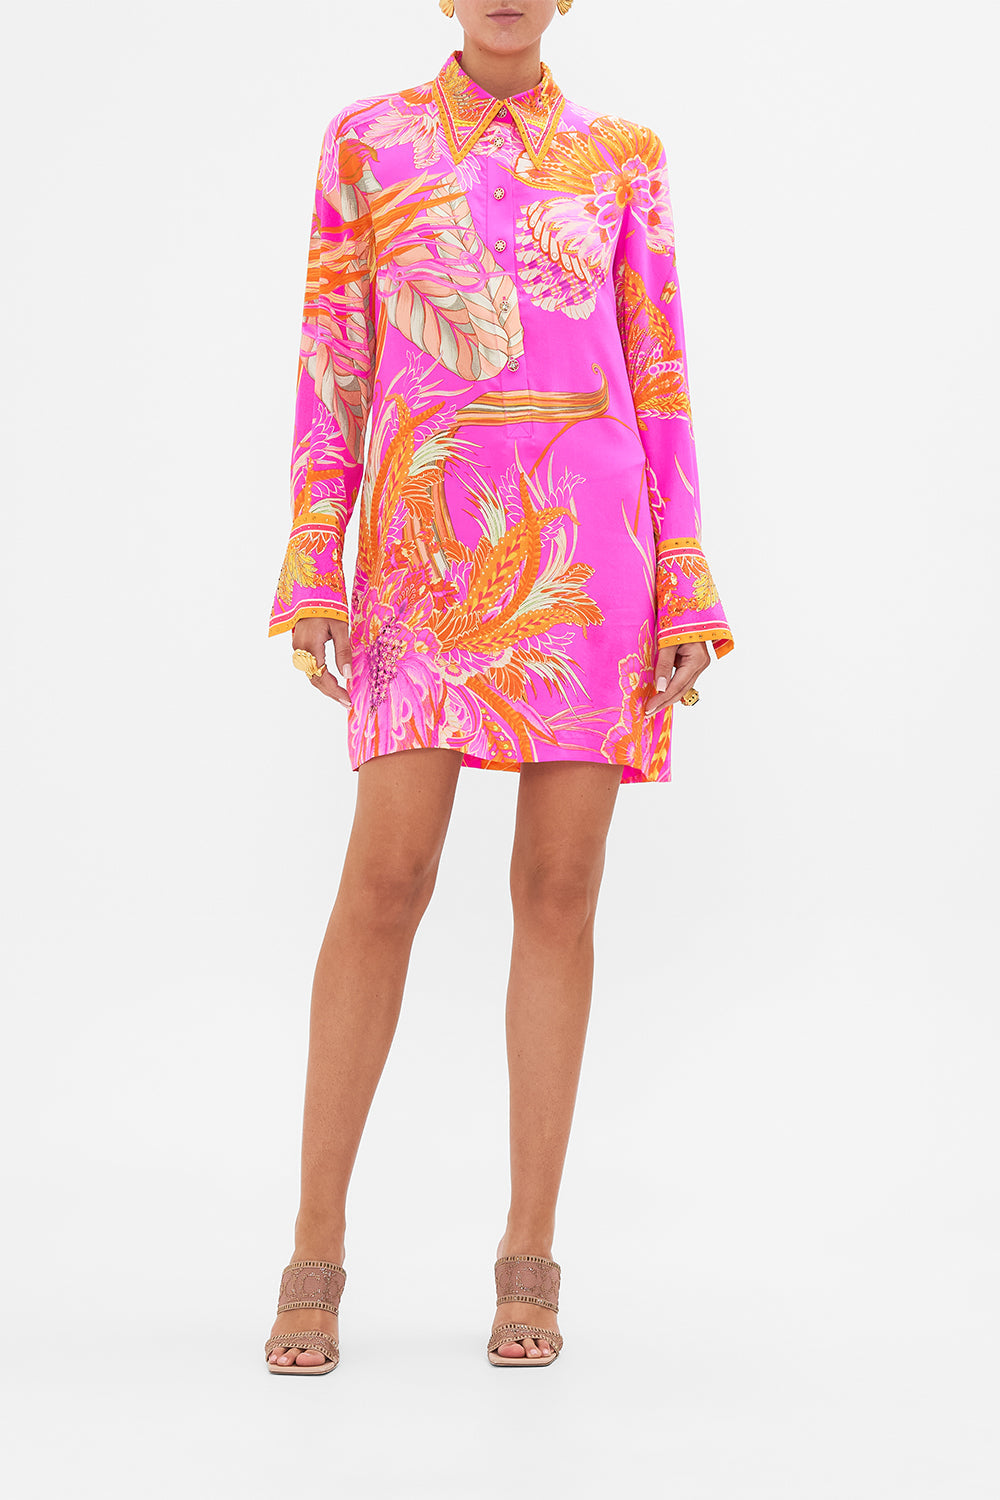 Front view of model wearing CAMILLA silk shirt dress in A Heart That Flutters print